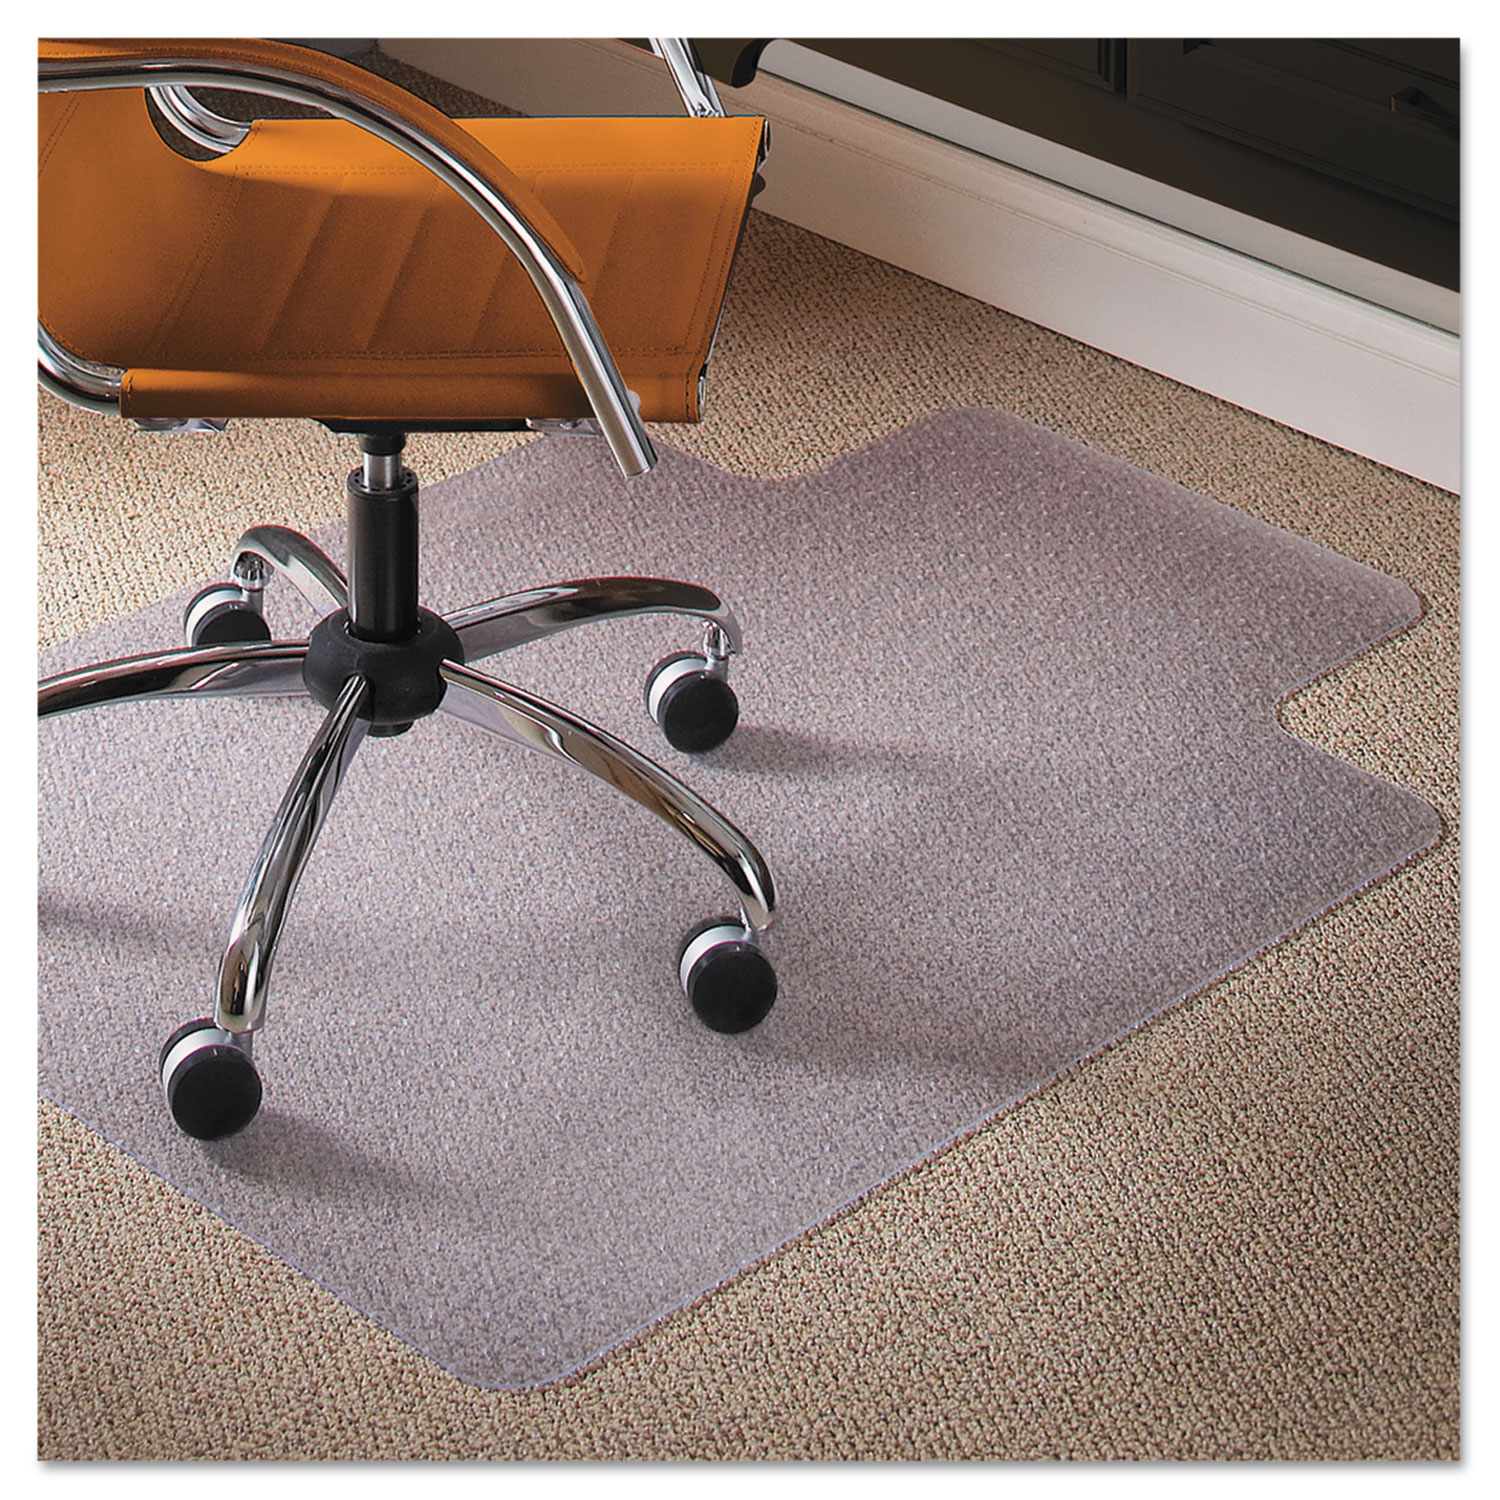 Natural Origins Chair Mat With Lip For Carpet, 36 x 48, Clear